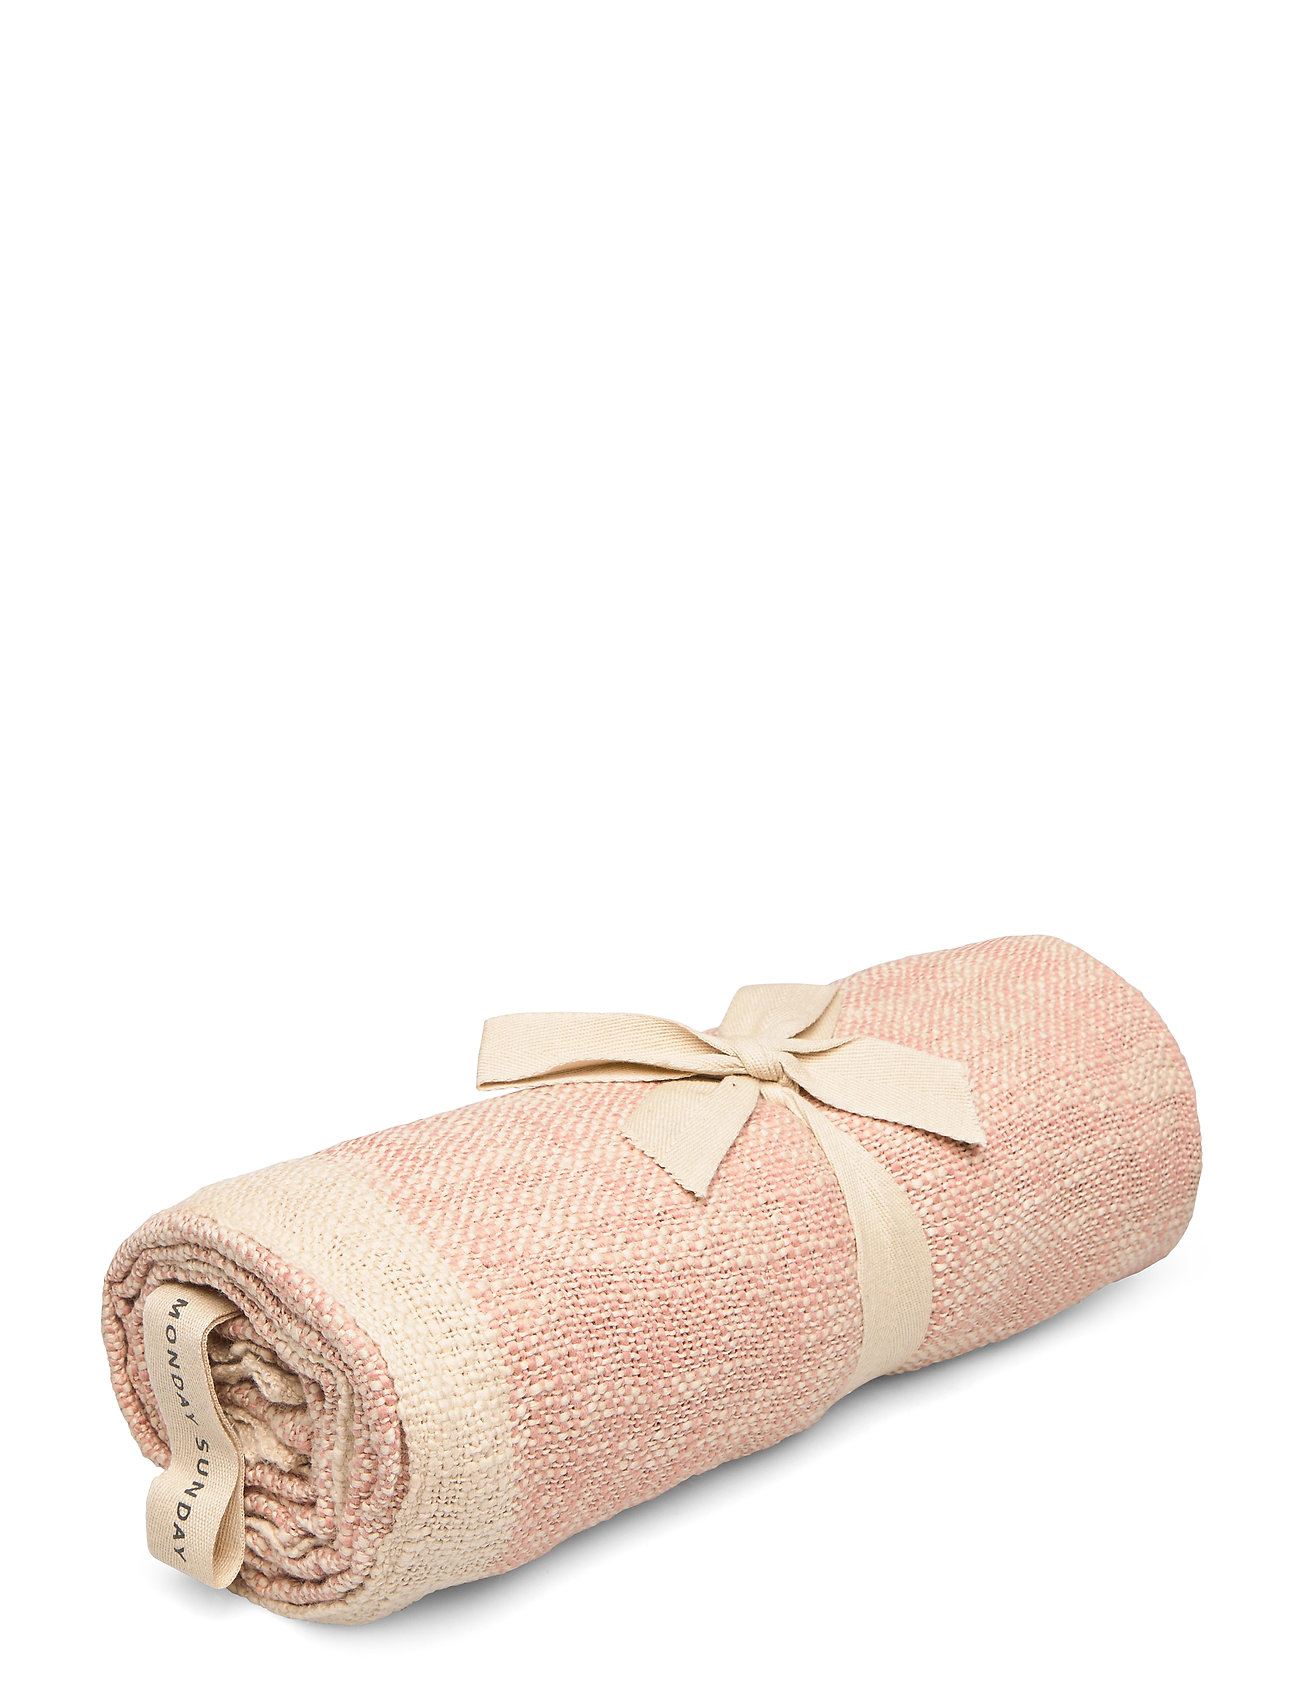 Cille Blanket Home Textiles Cushions & Blankets Blankets & Throws Pink Monday Sunday